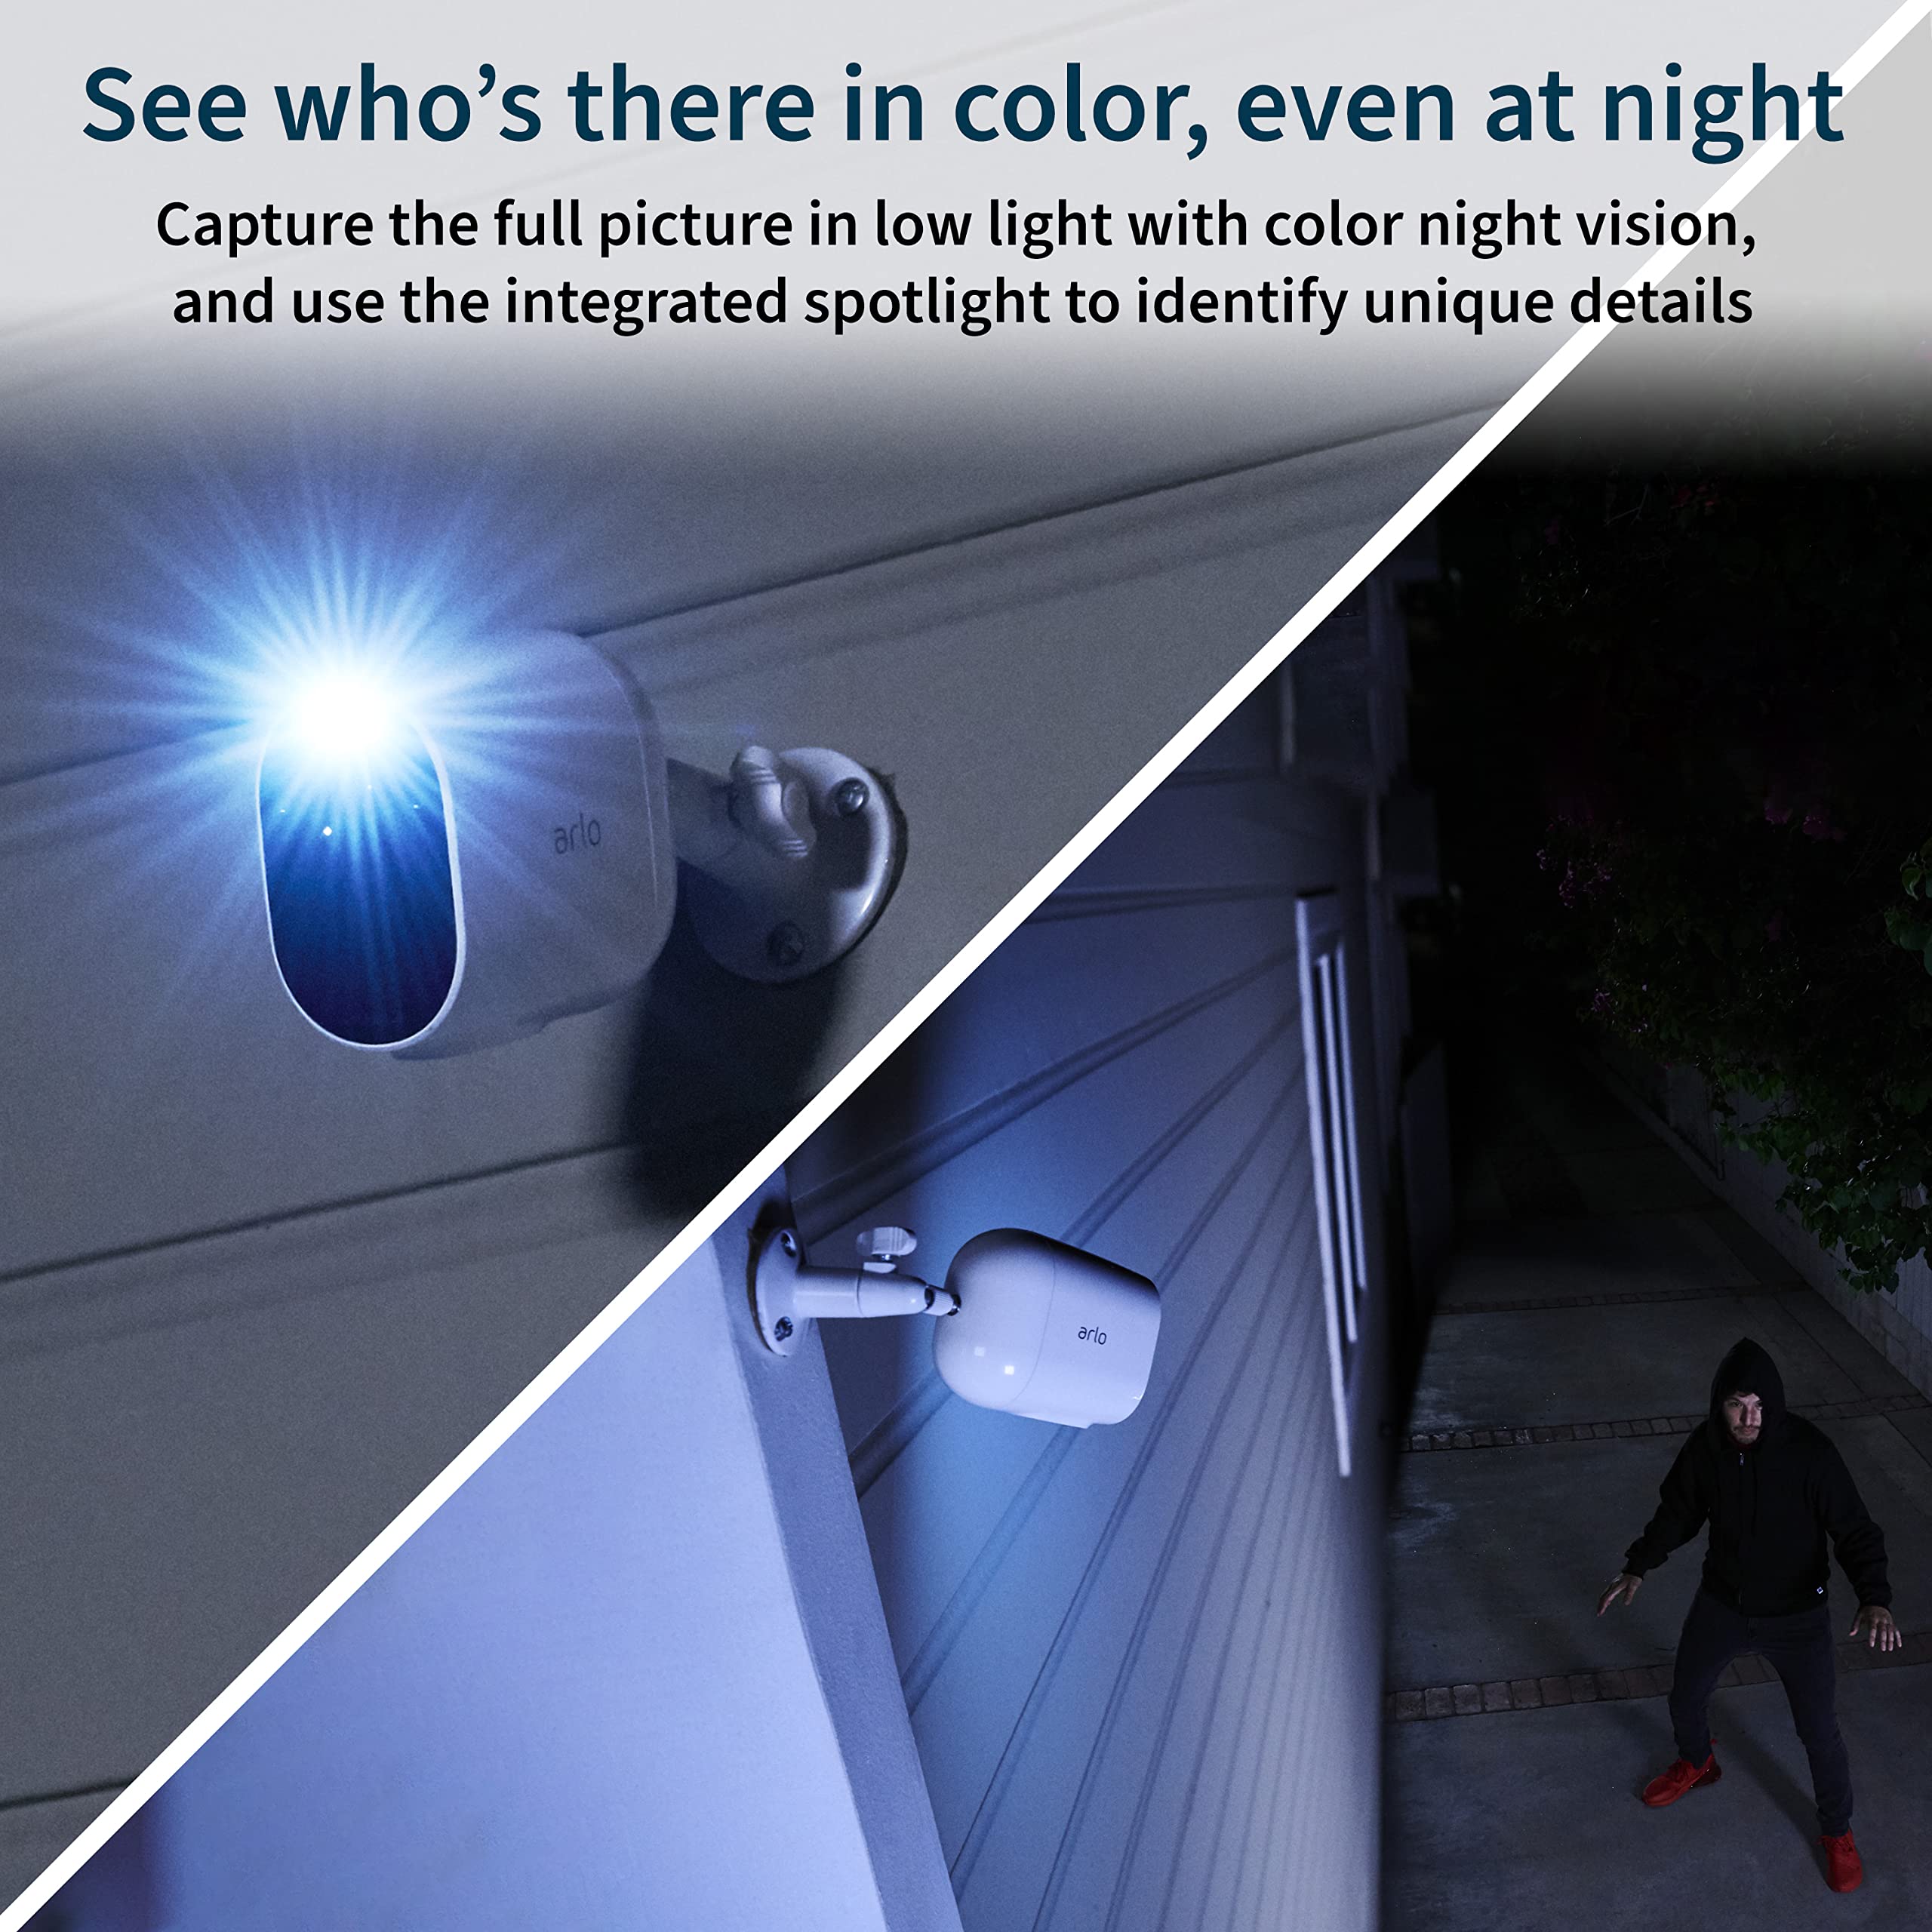 Arlo Essential Spotlight Camera - 2 Count (Pack of 1) - Wireless Security, 1080p Video, Color Night Vision, 2 Way Audio, Wire-Free, Direct to WiFi No Hub Needed, Compatible with Alexa, White, VMC2230